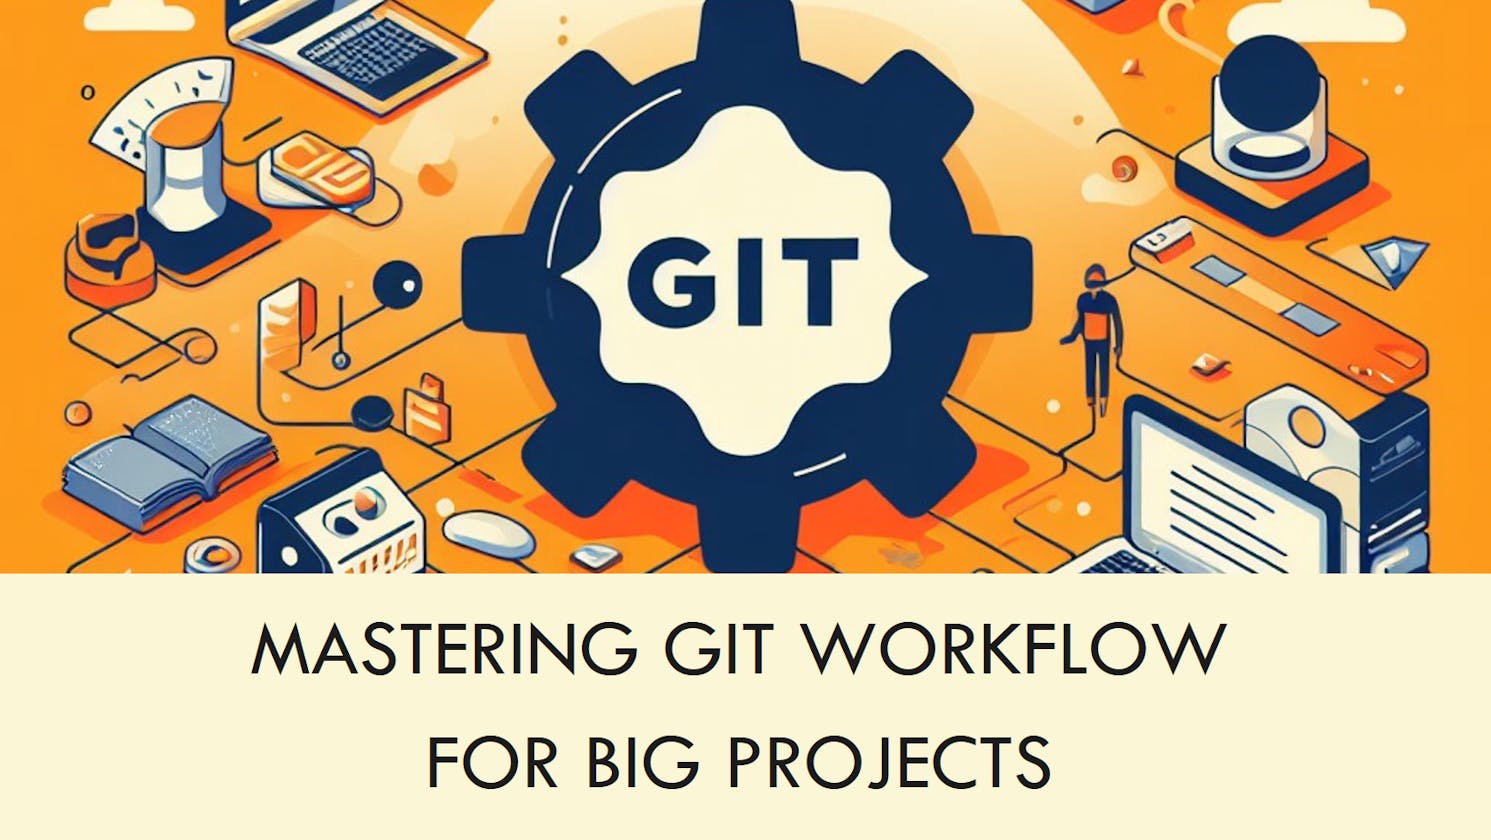 Git Workflow for Big Teams: Simplified Guide to Managing Large Projects with Multiple Developers and Ad-Hoc Fixes